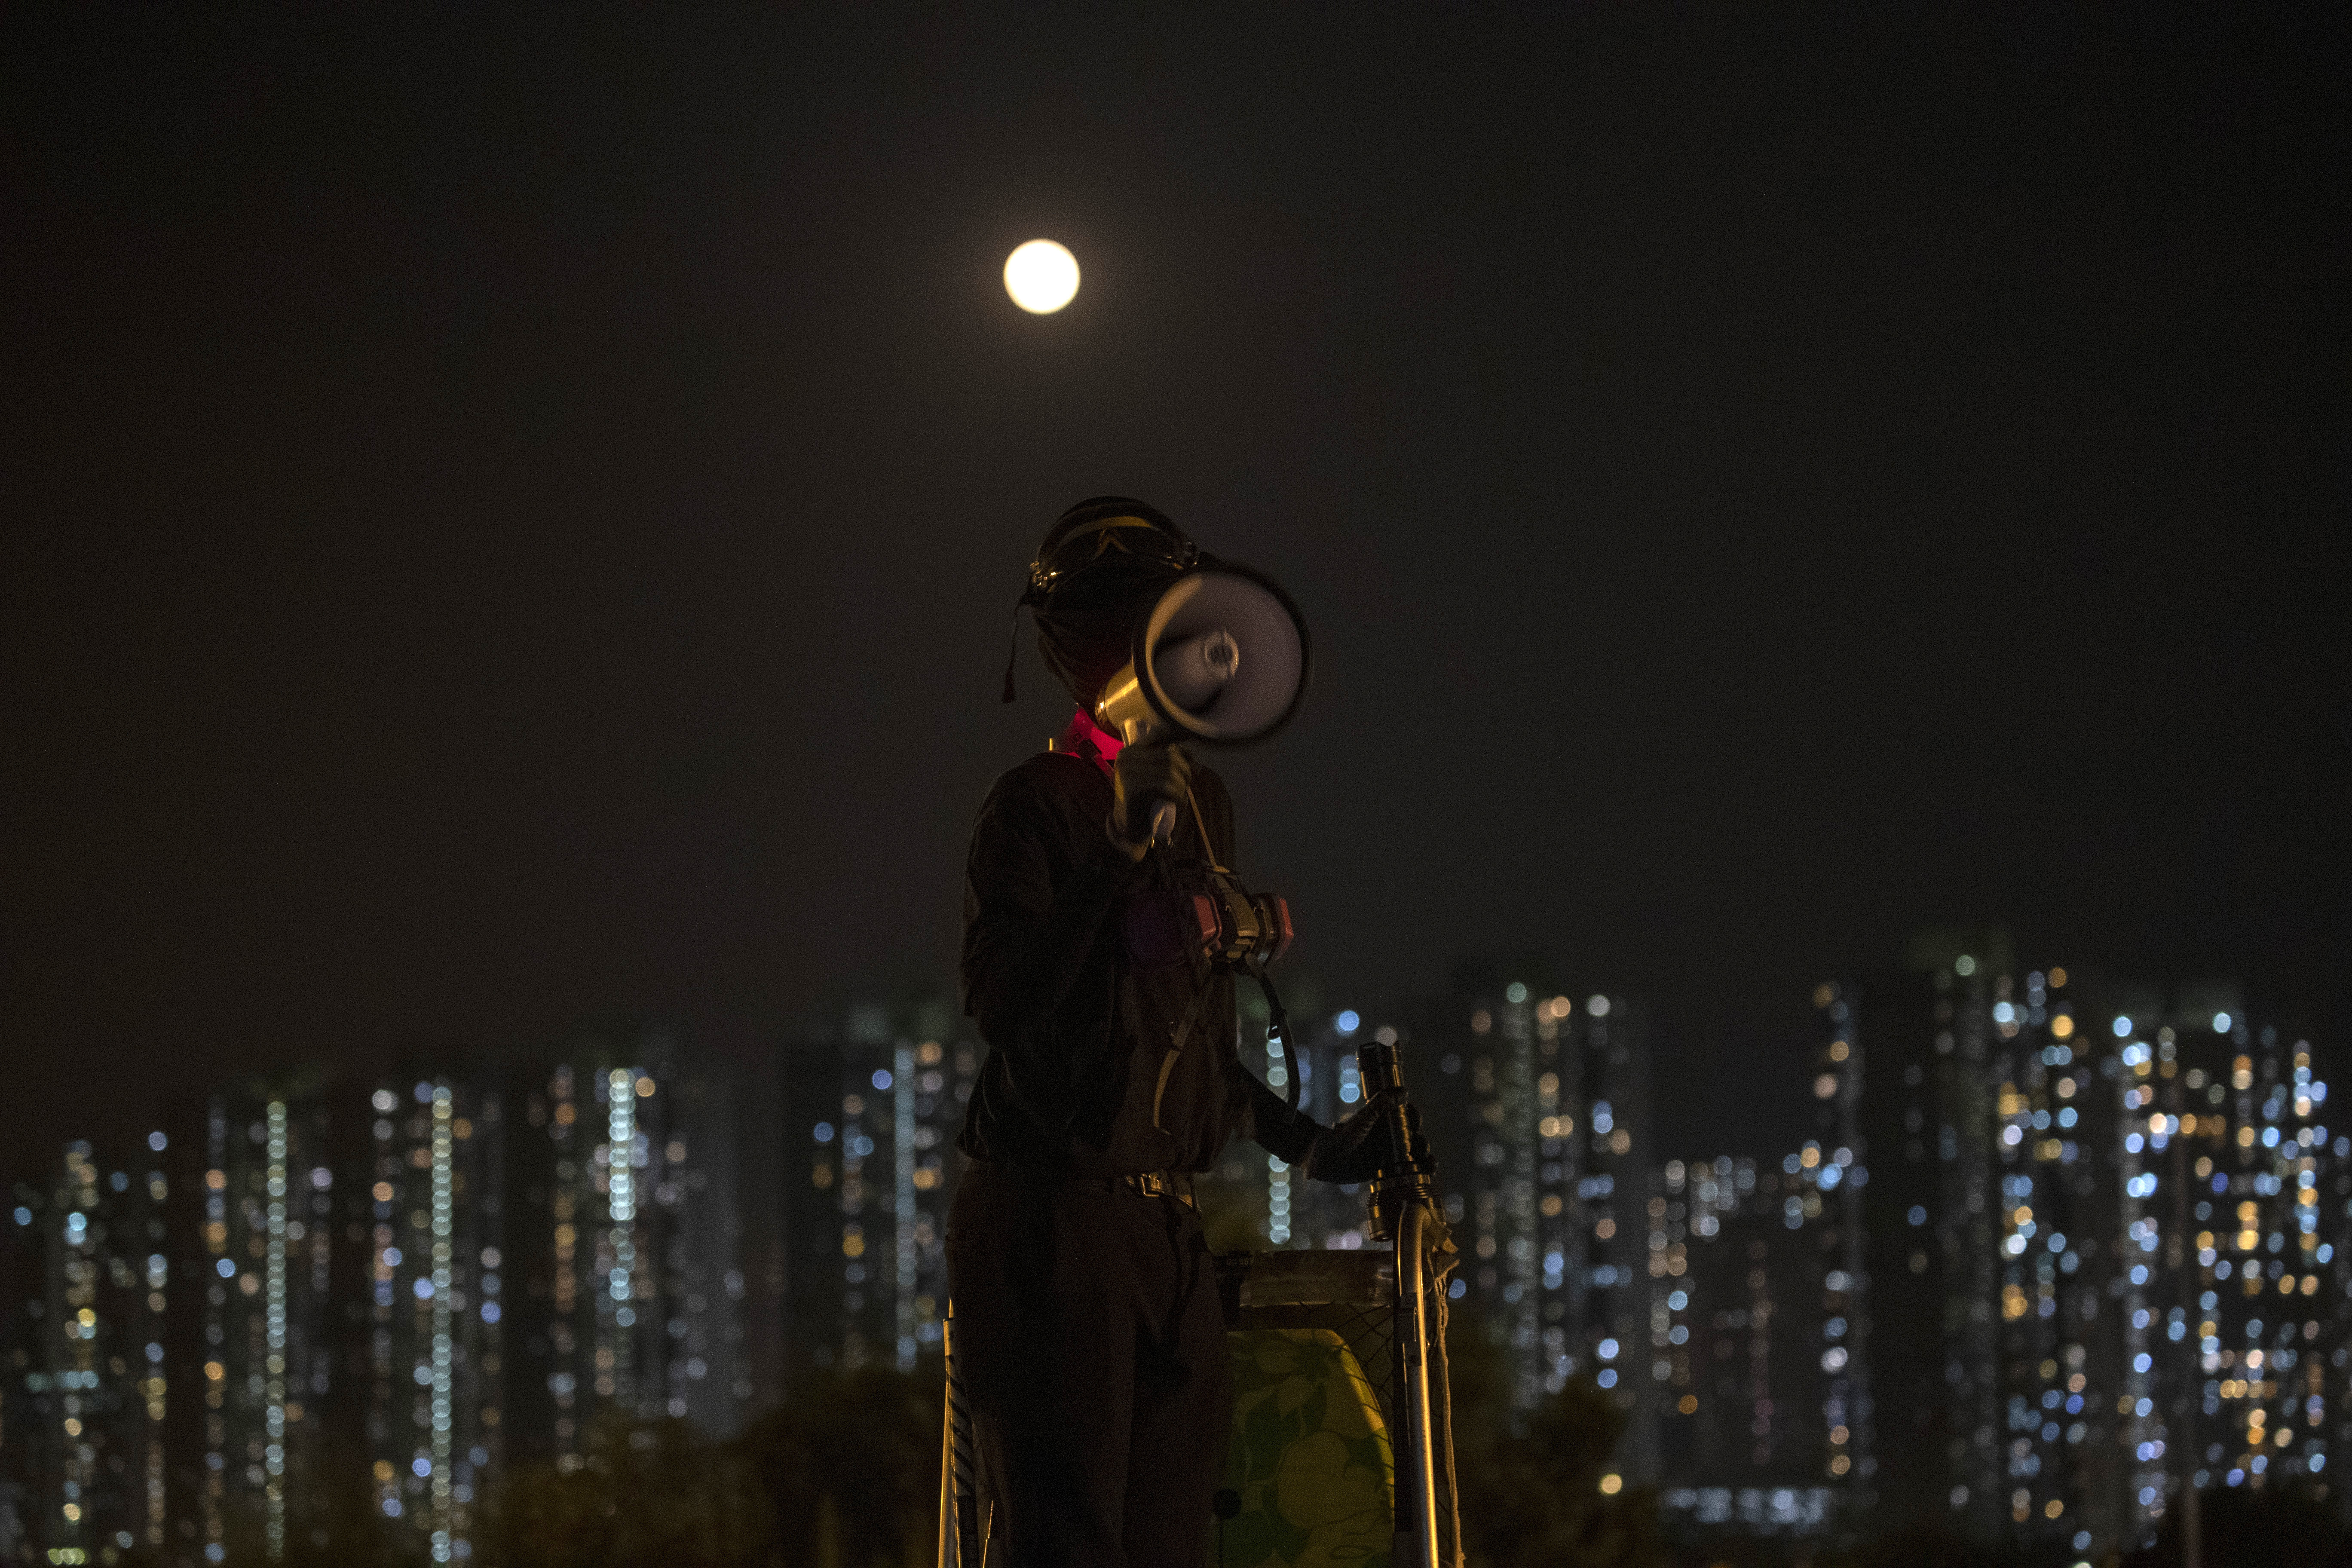 A protester speaks over a loud megaphone as a full moon rises over the barricaded bridge into the Chinese University of Hong Kong on Wednesday night. 